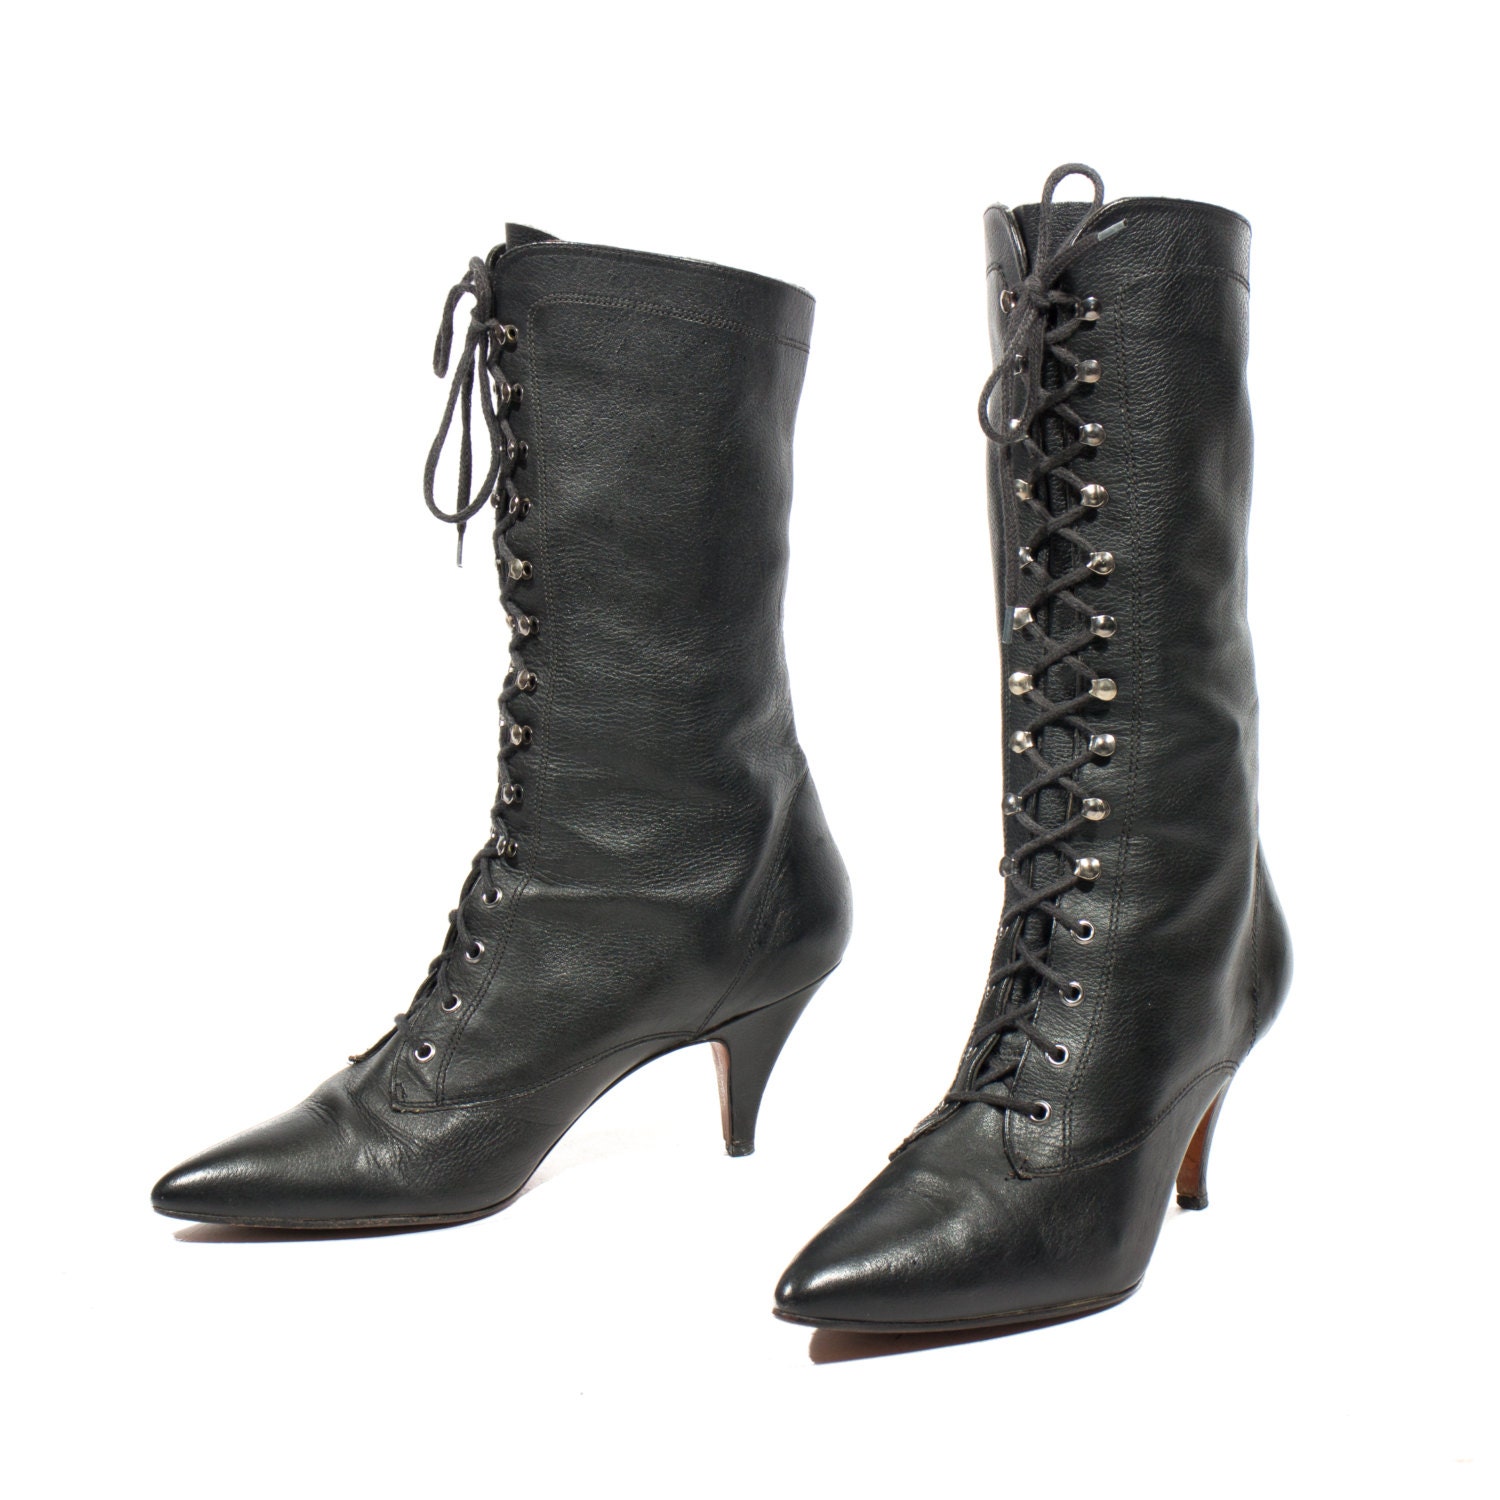 L.J. Simone Black Leather Witch Boots Mid Calf Lace Up High